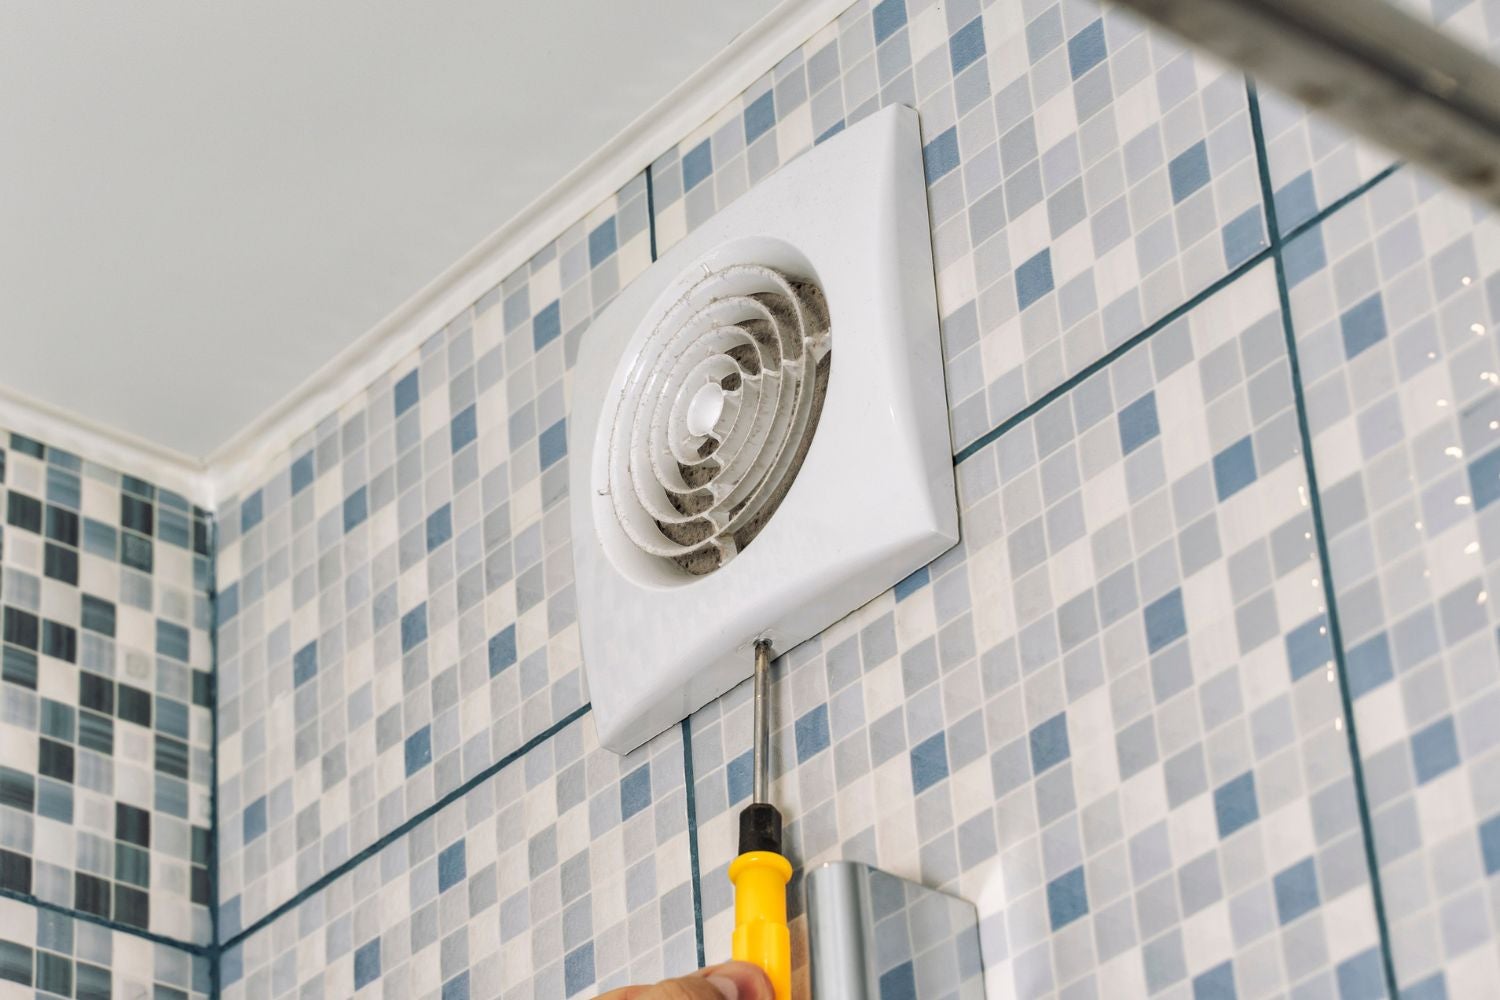 How to Exhaust Multiple Bathroom Fans